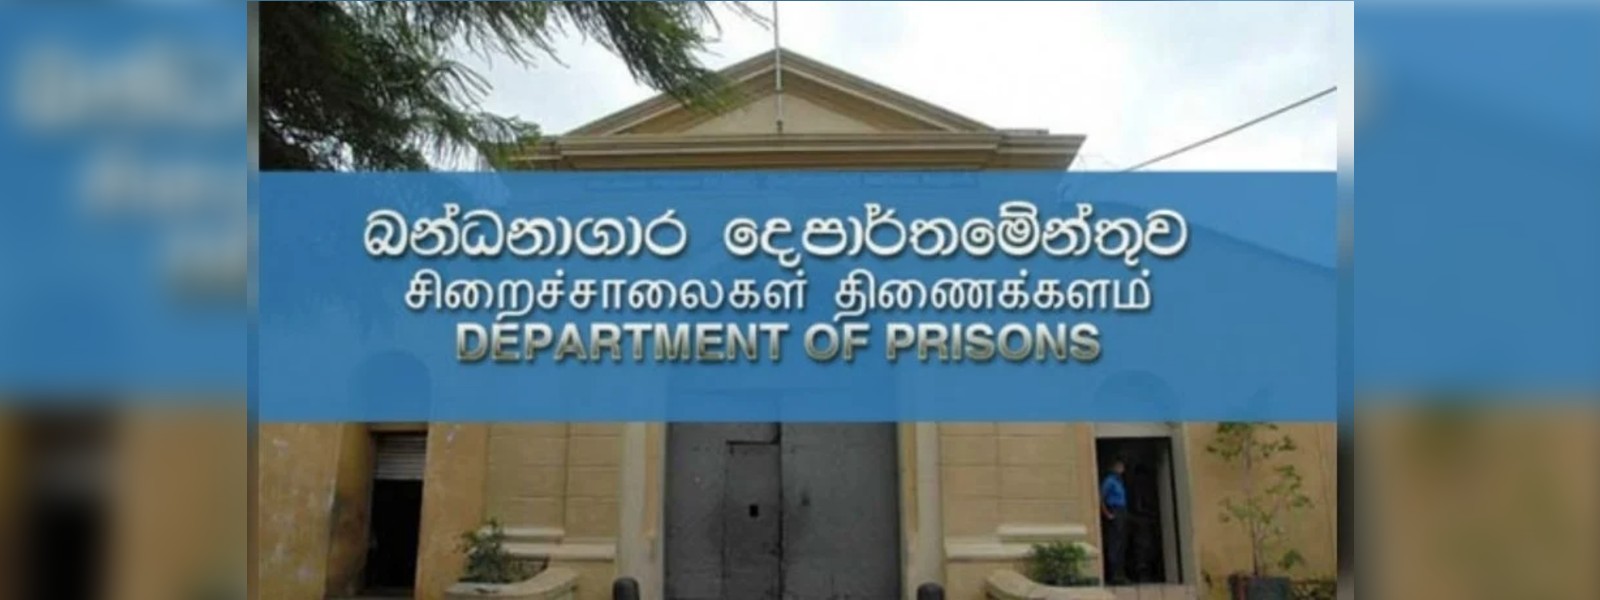 All COVID-19 infected prisoners to be moved to Treatment Facilities